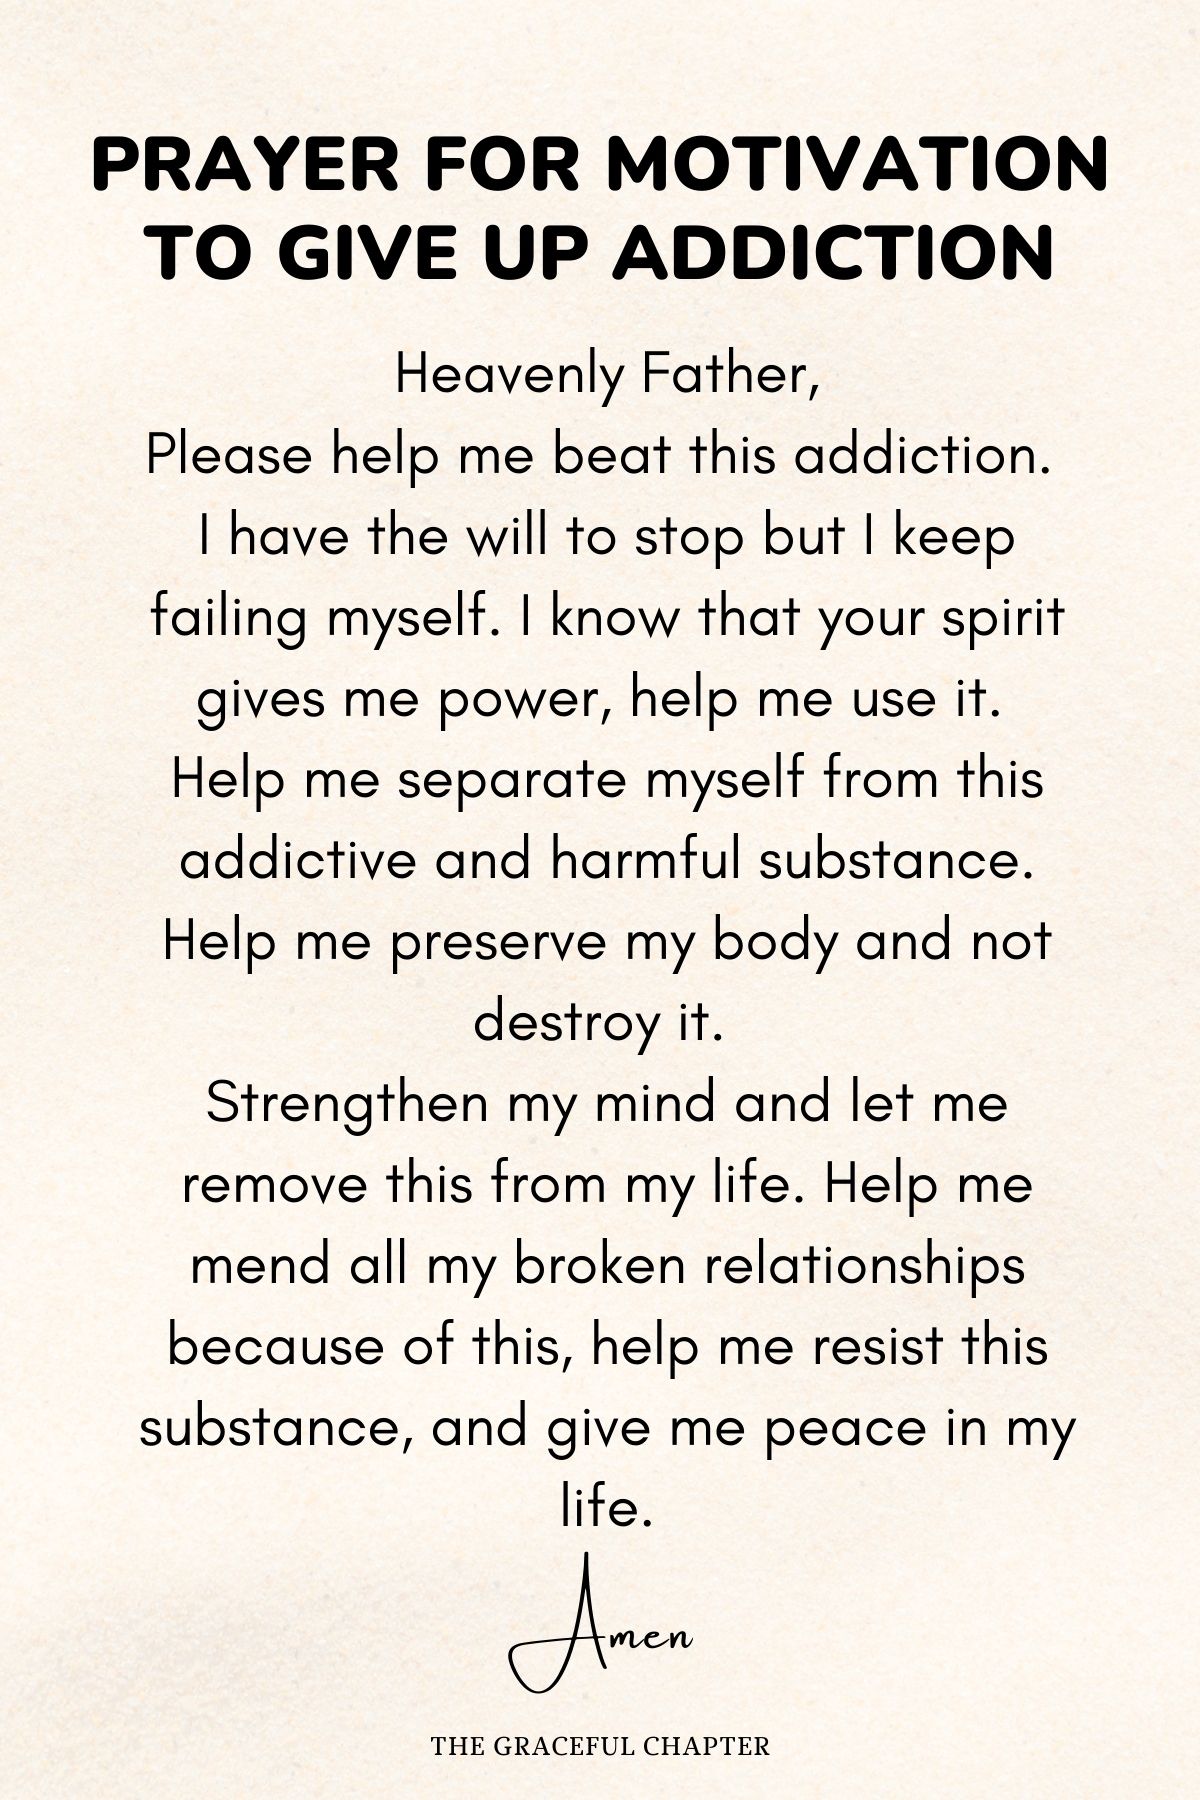 Prayer for motivation to give up addiction